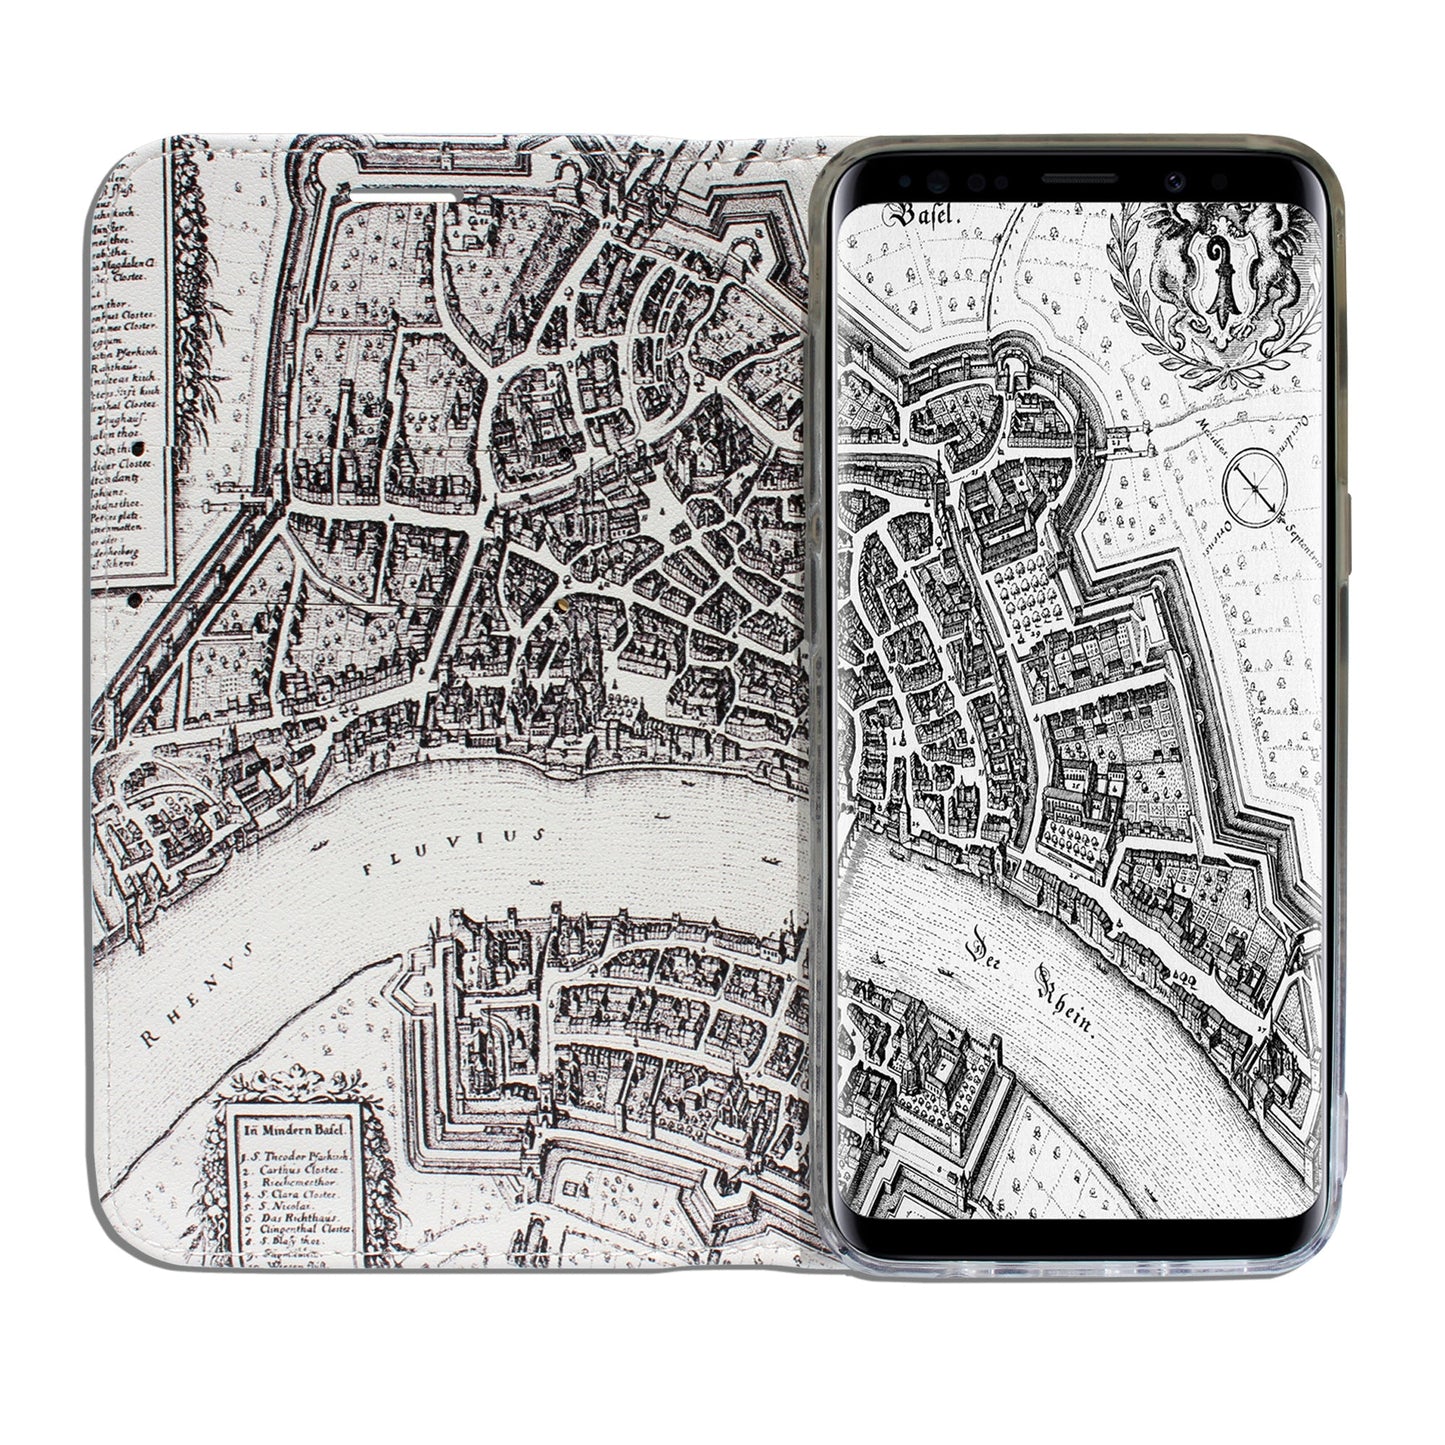 Basel City Spalentor Panorama Case for Samsung Galaxy S9 Plus